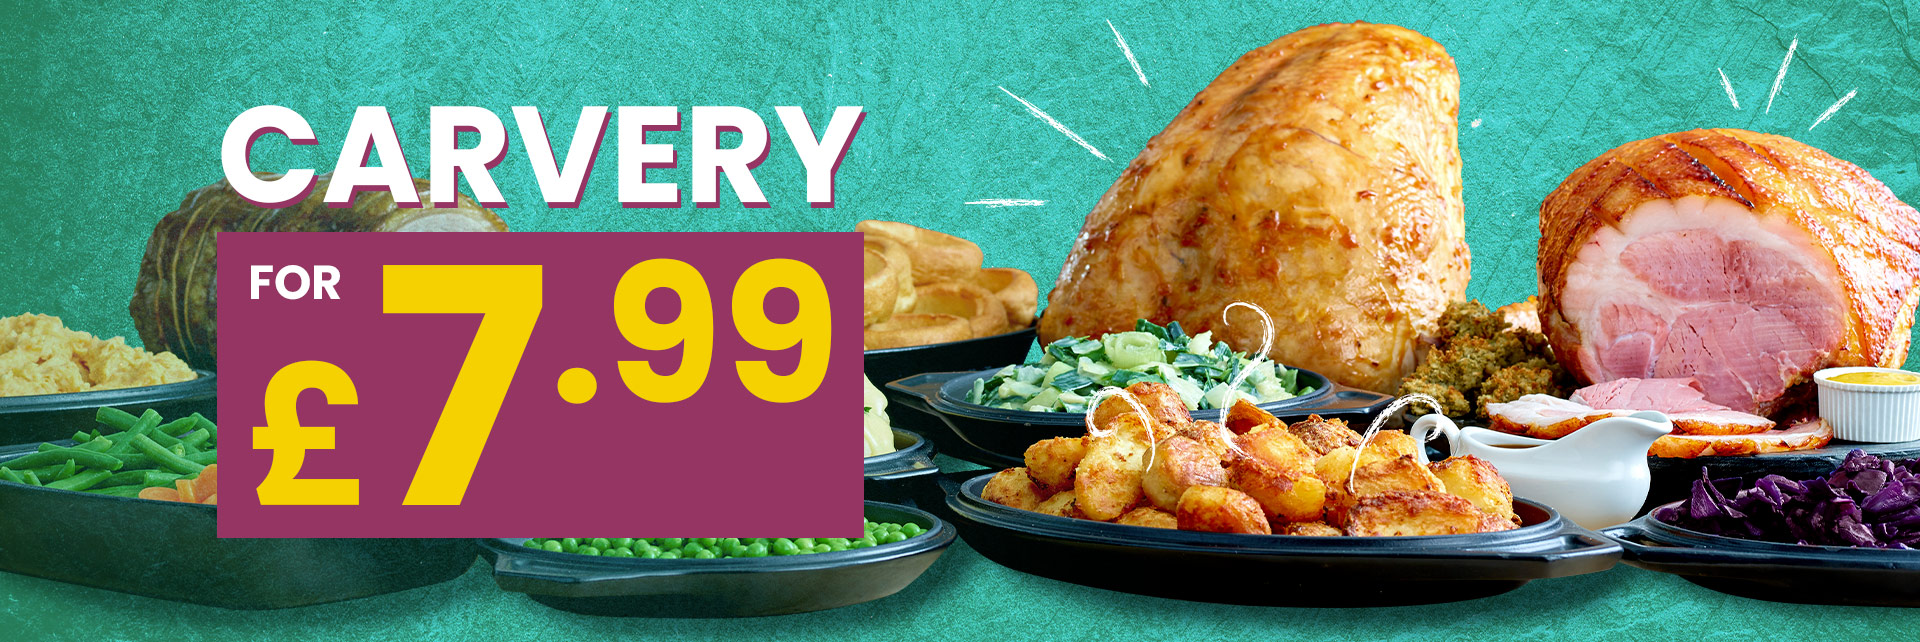 sizzling-offers-carvery-banner-7.99.jpg